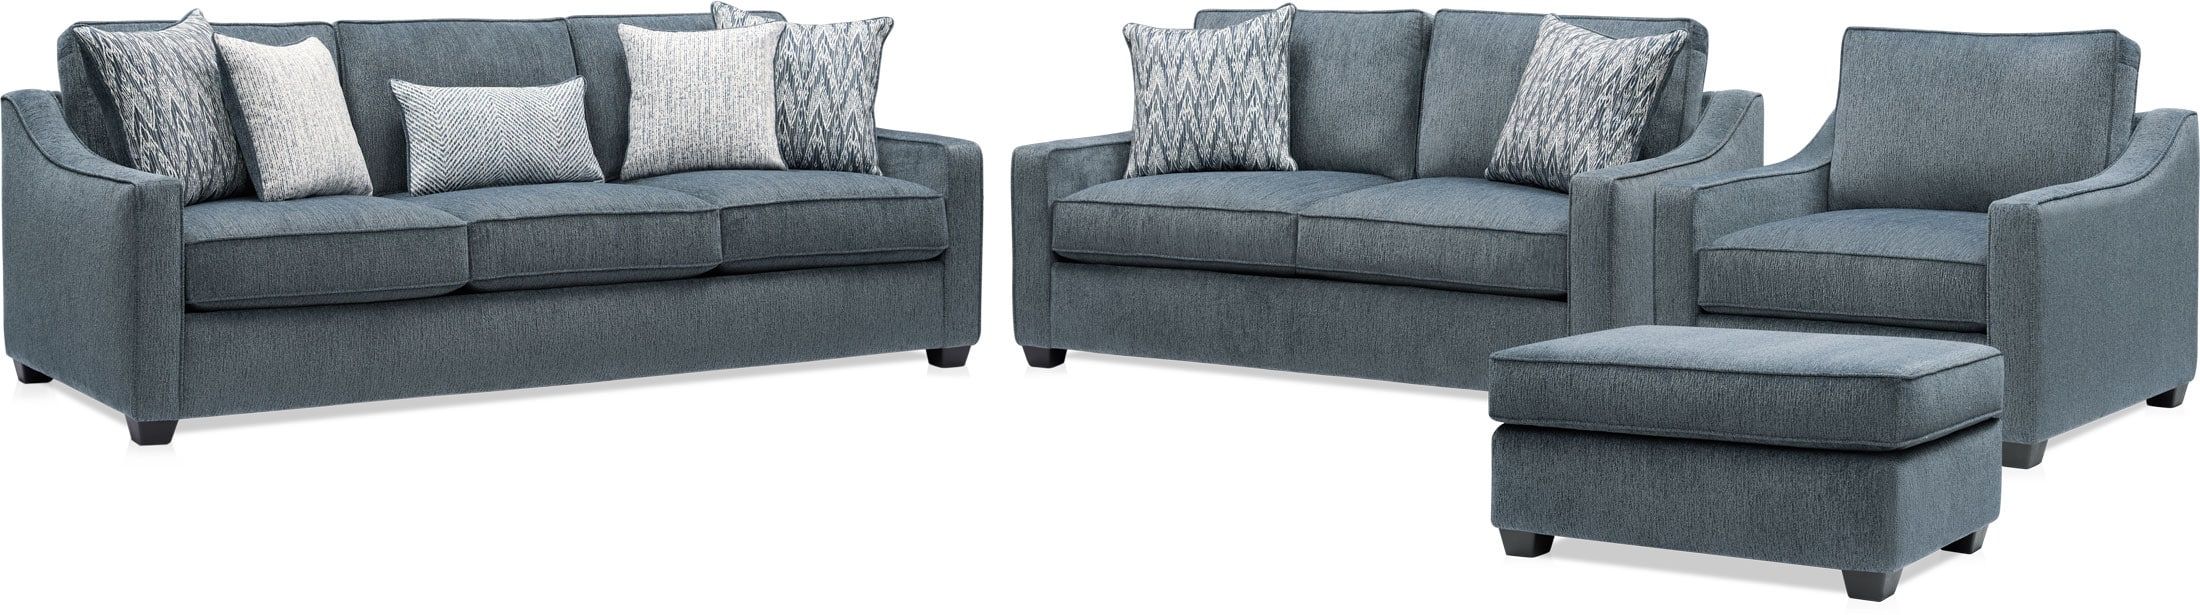 Luxurious Living: Introducing the Callie
Sofa Chair Collection